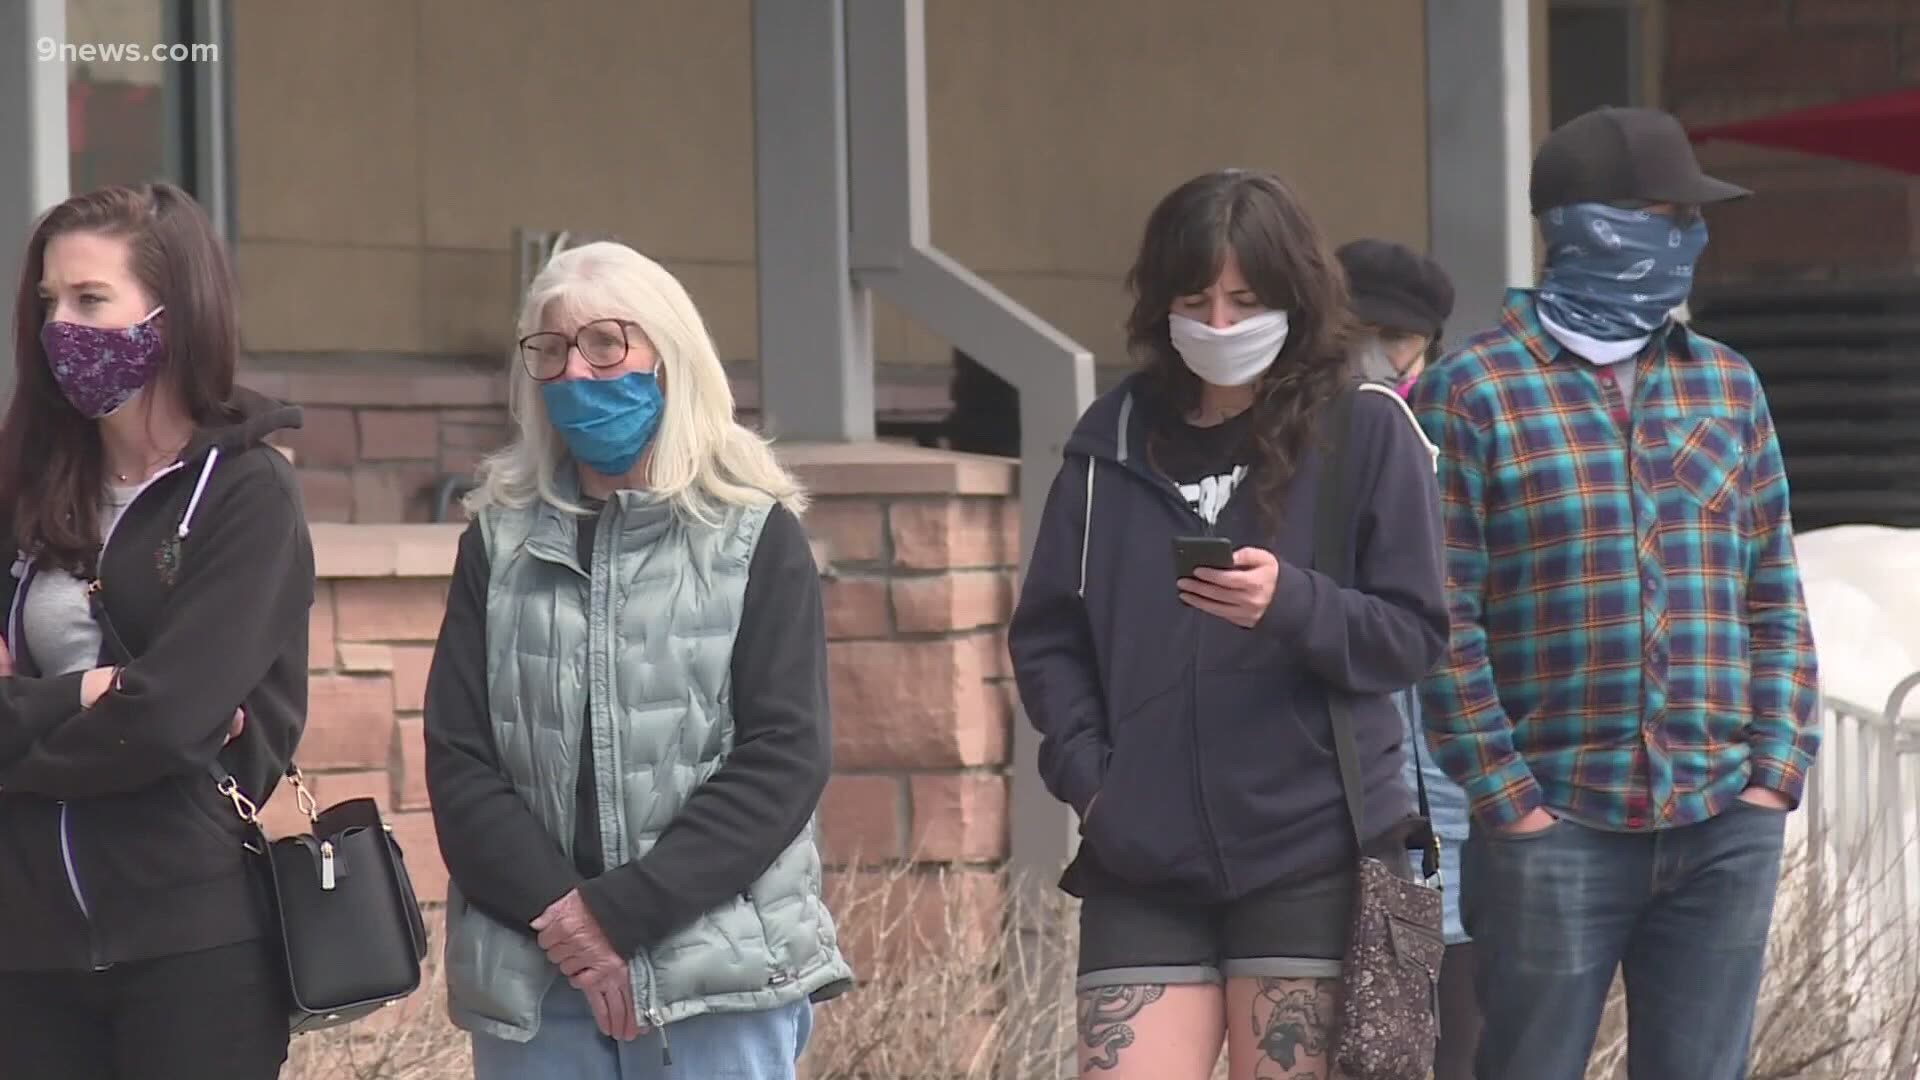 Tri-County Health Department said more than 90% of people are wearing masks in Adams, Arapahoe and Douglas counties.